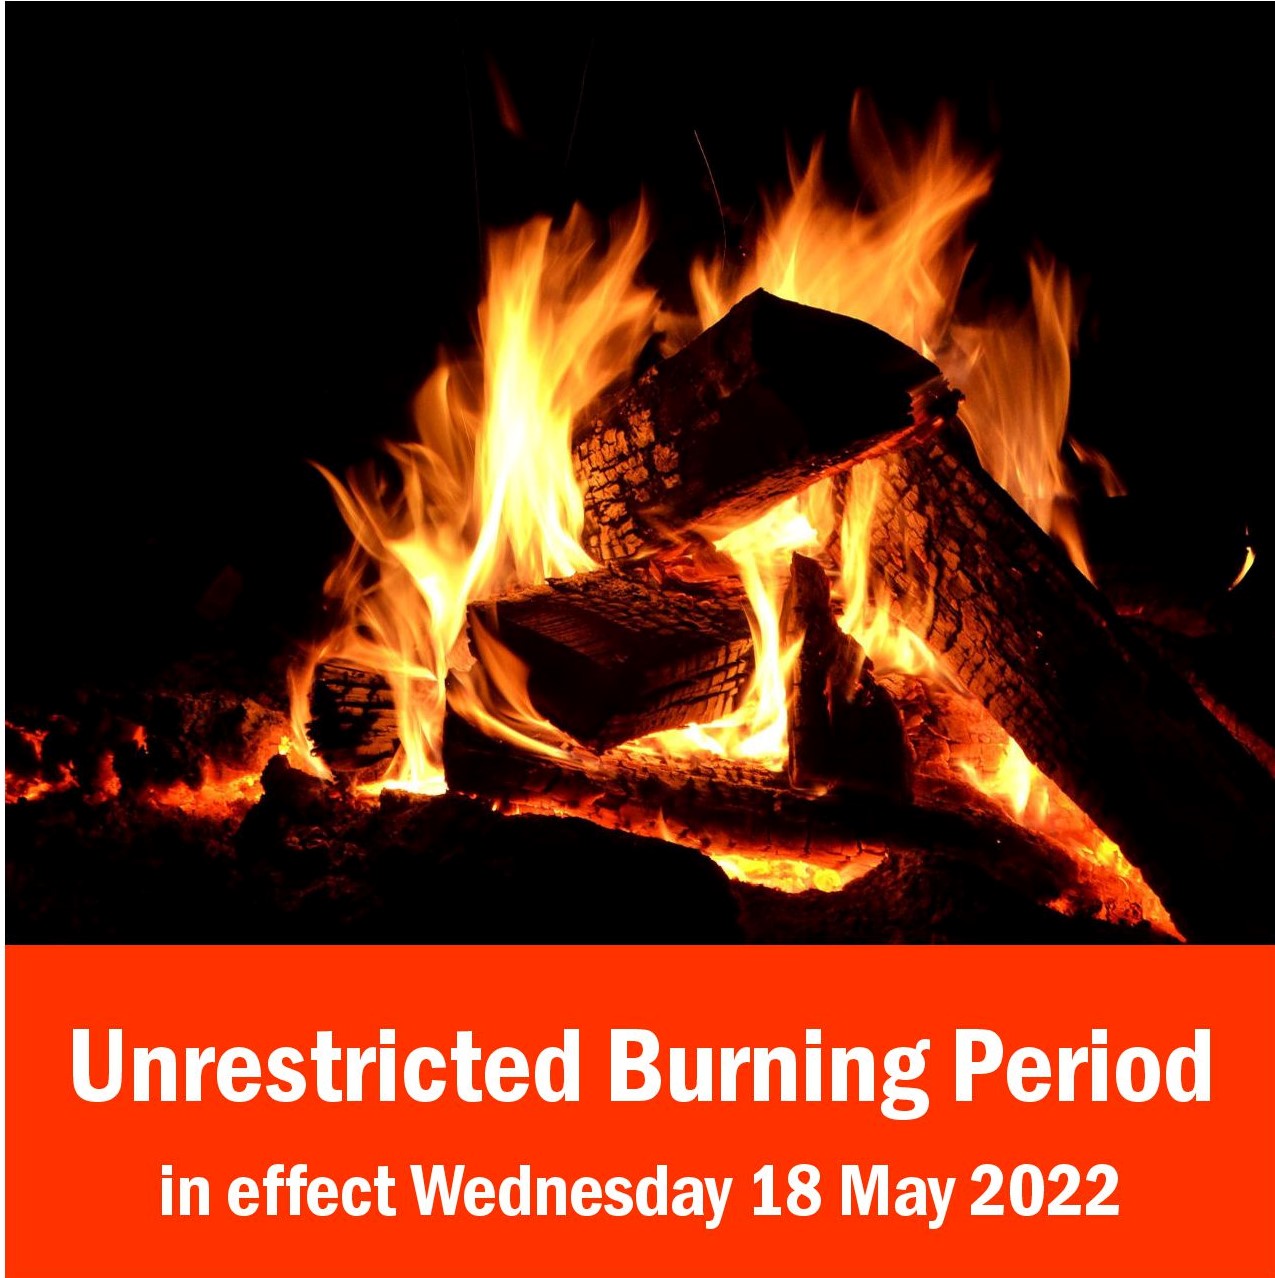 End of Restricted Burning Period - Wednesday 18 May